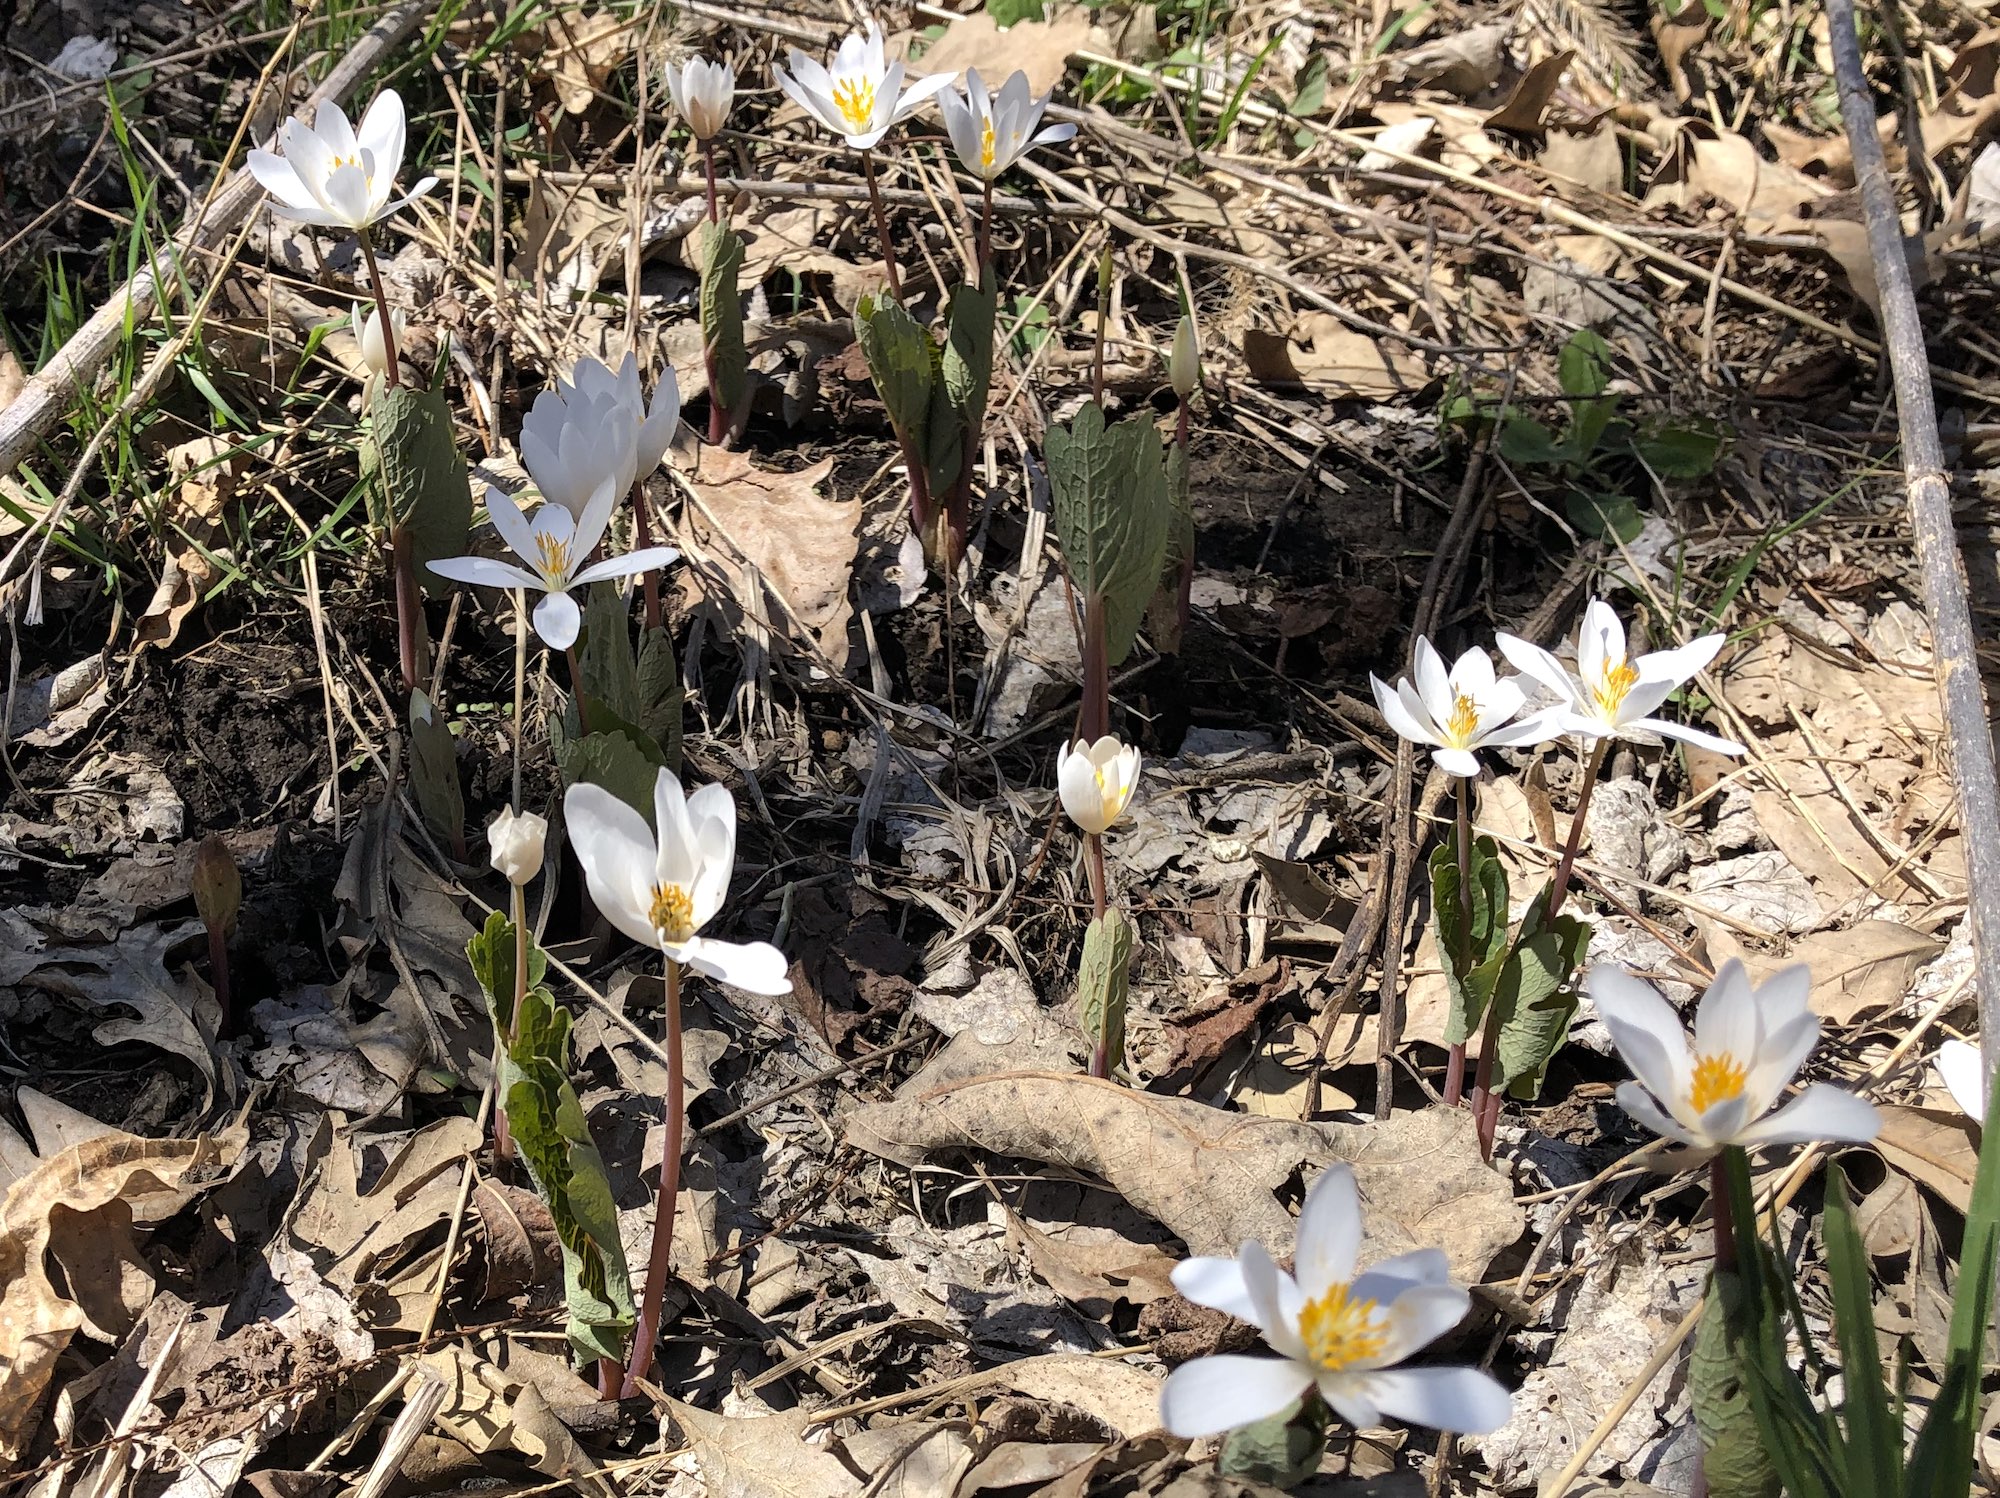 Bloodroot near Council Ring on April 15, 2019.